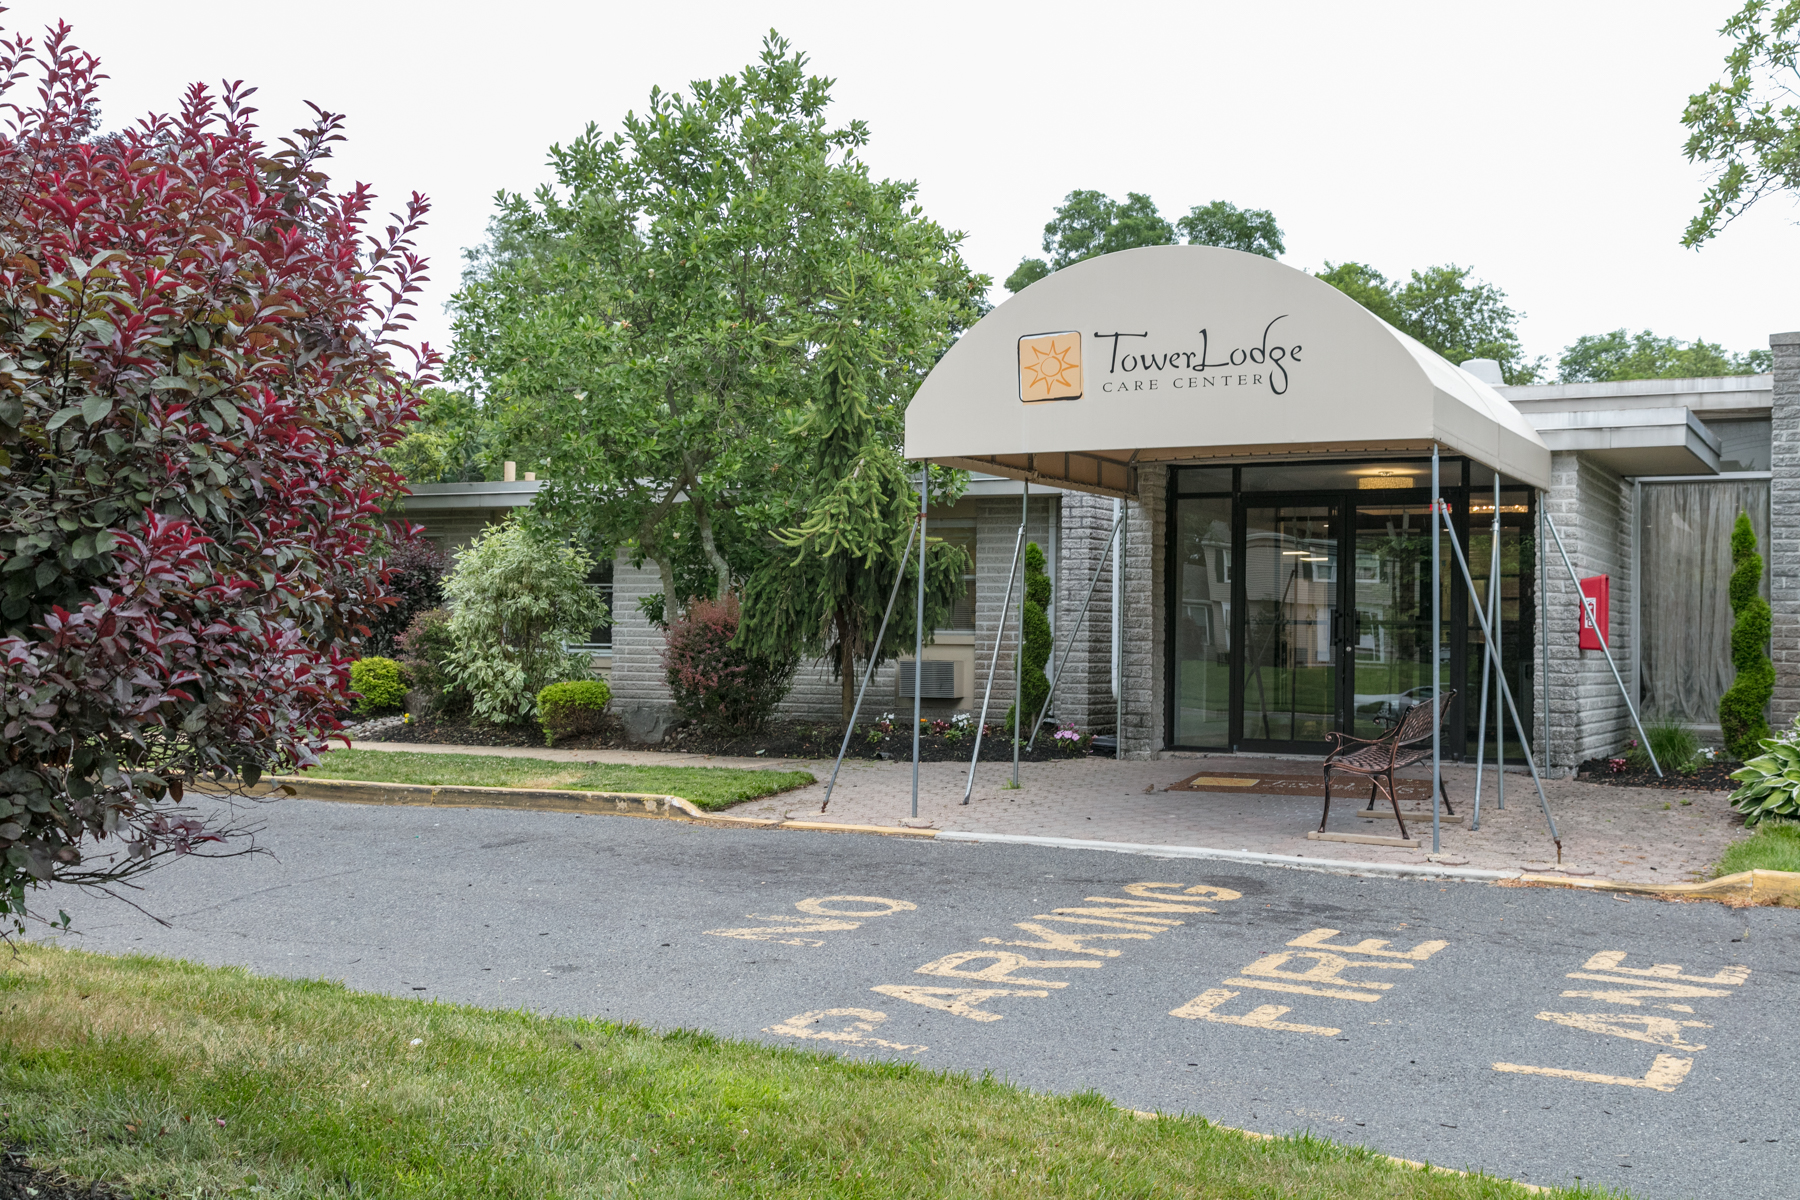 Tower Lodge Care Center image